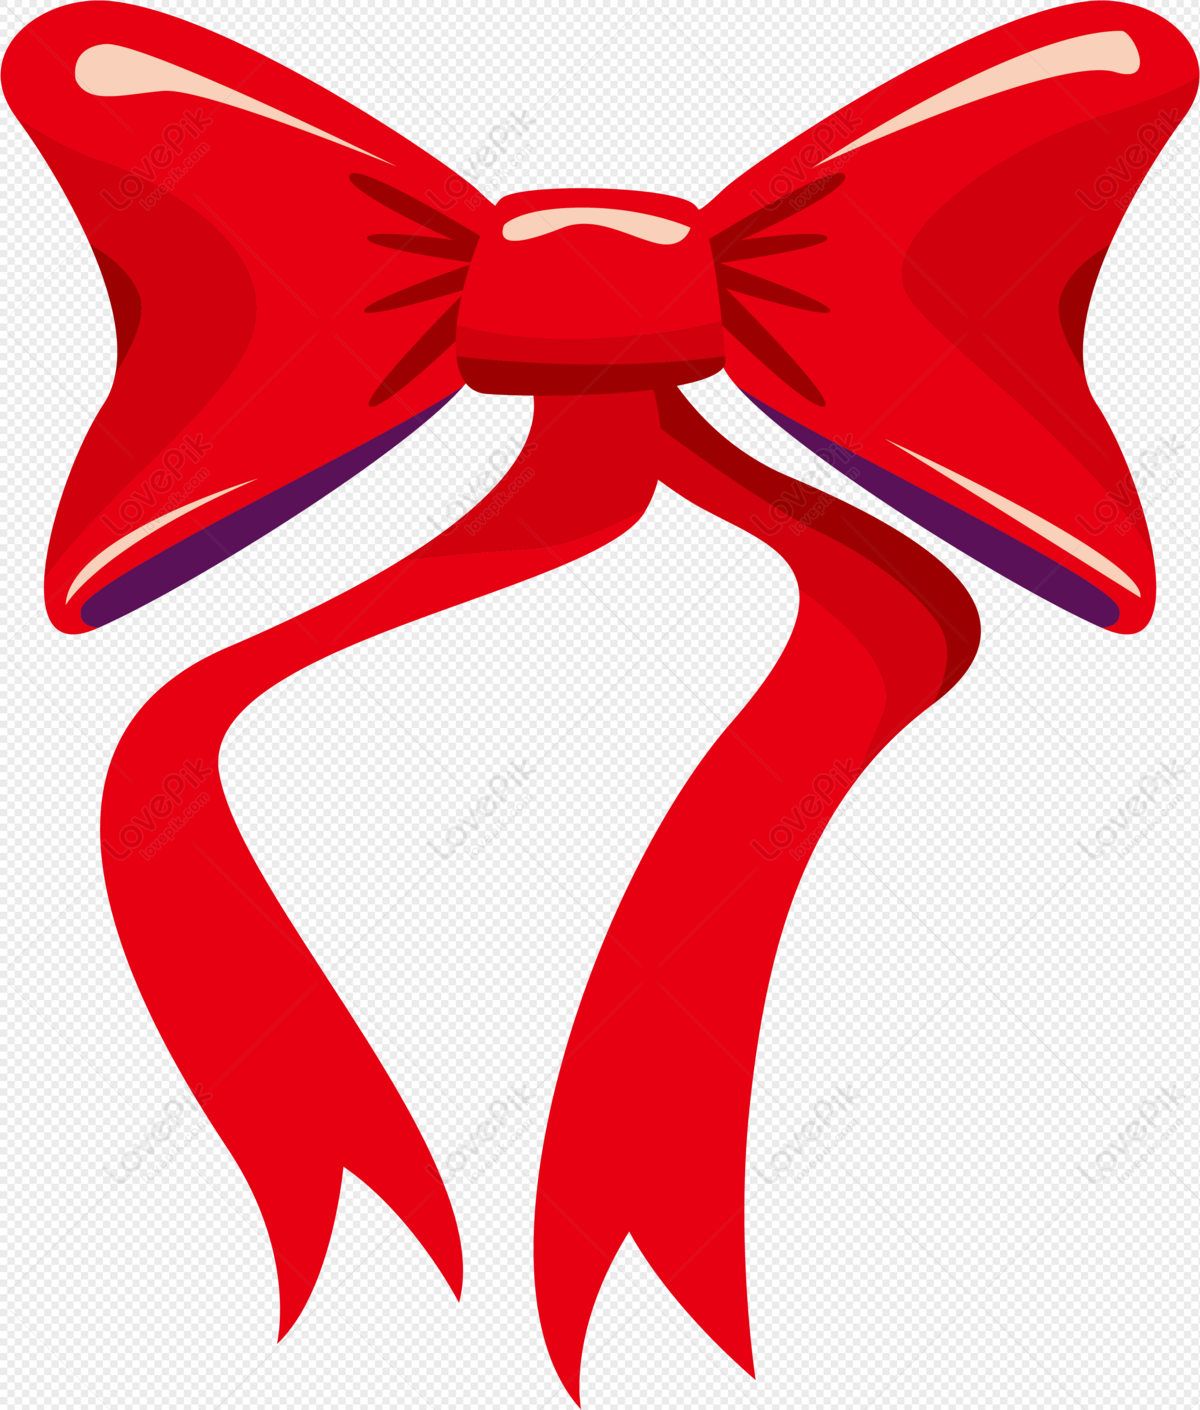 Christmas red bow clipart. Free download transparent .PNG